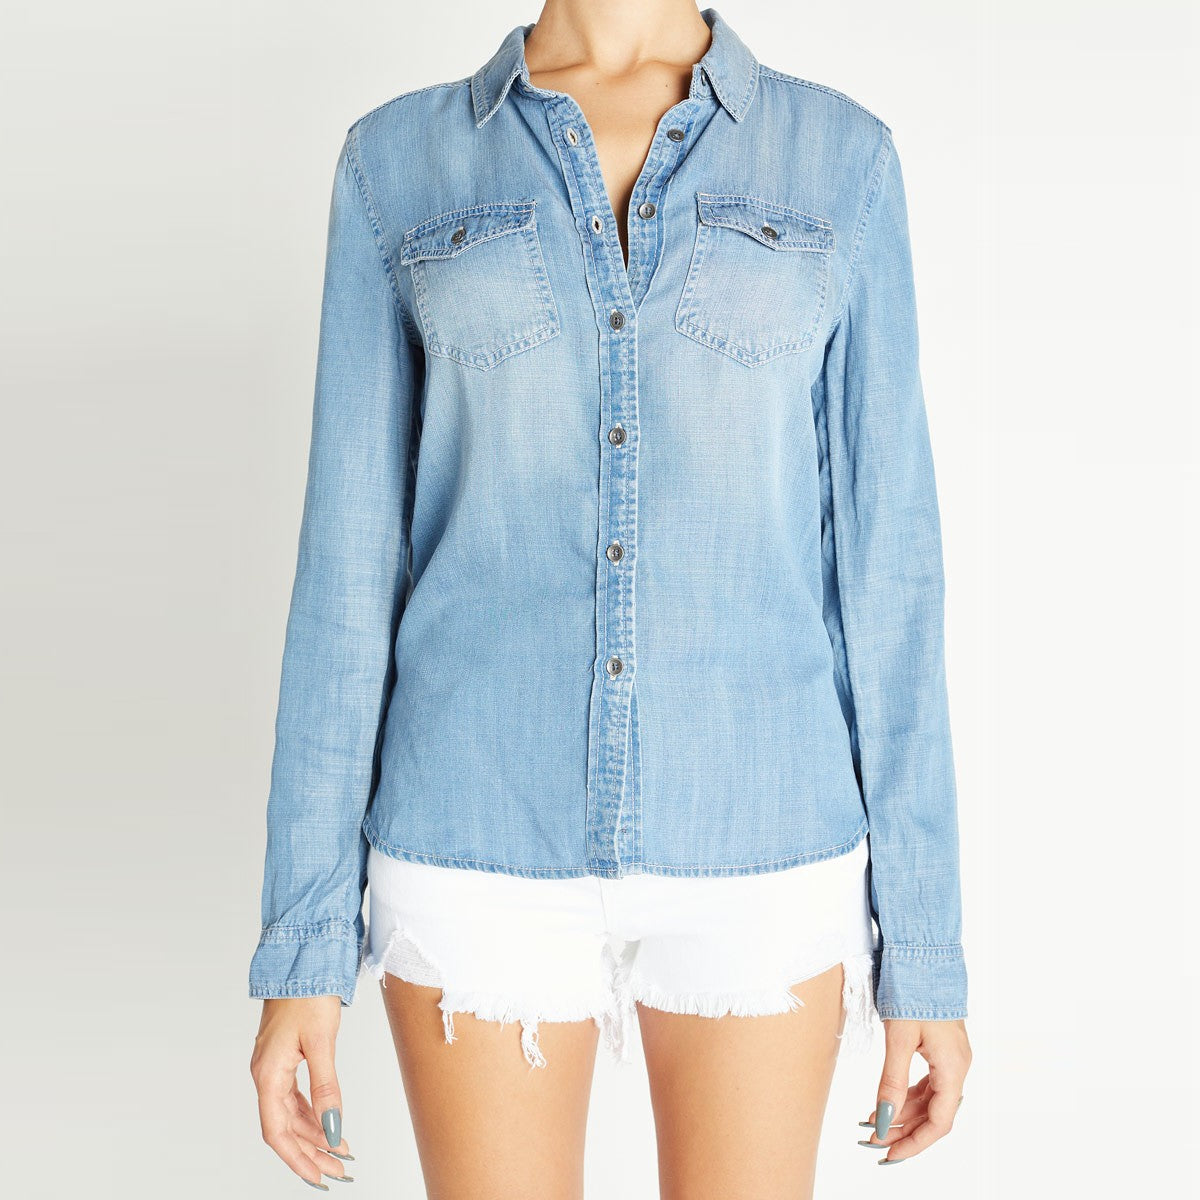 All American Girl Fitted Denim Shirt in Light Wash